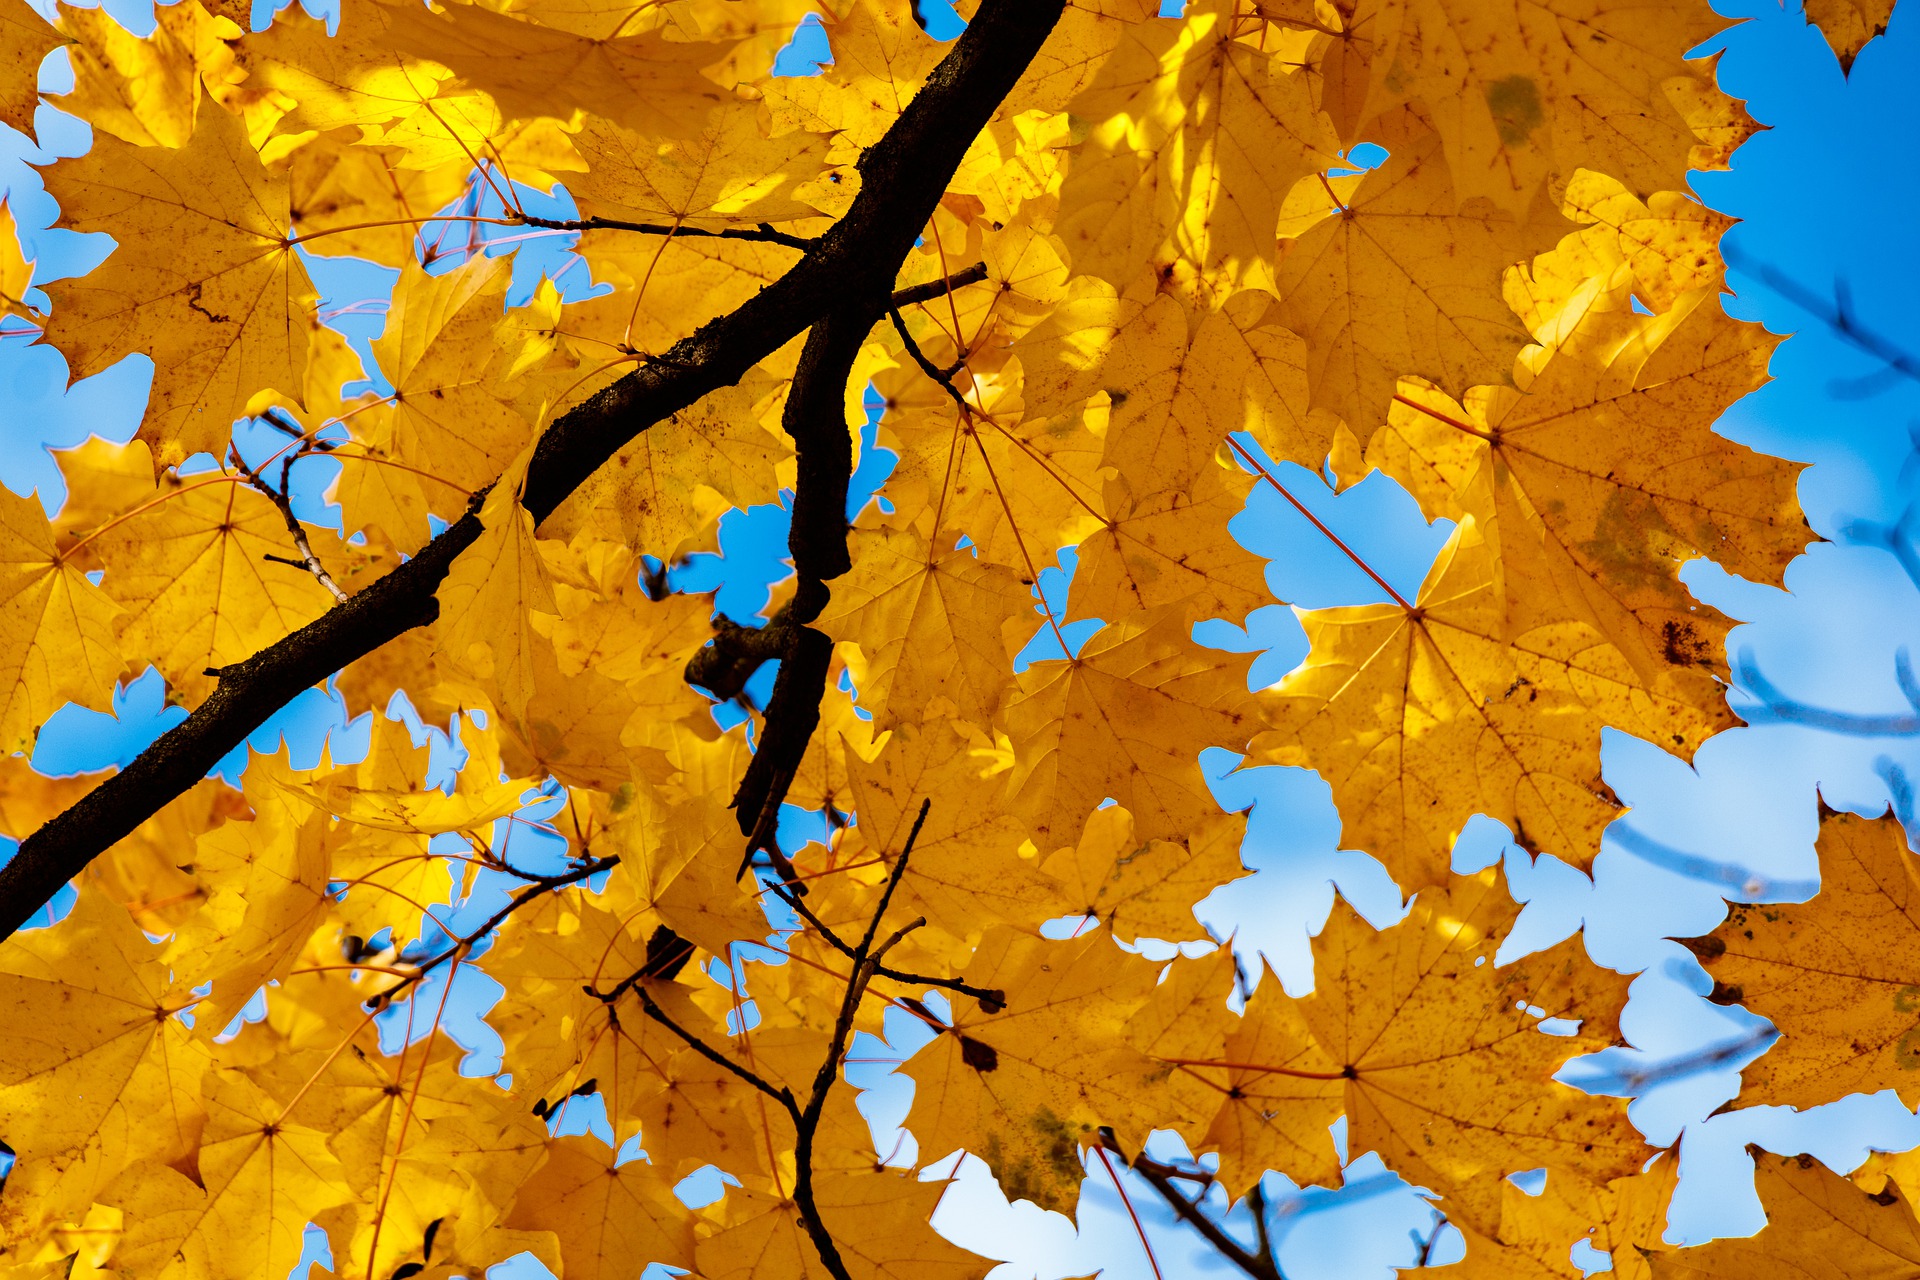 POV from the ground, Golden-yellow maples leaves silhouetted against a clear blue sky